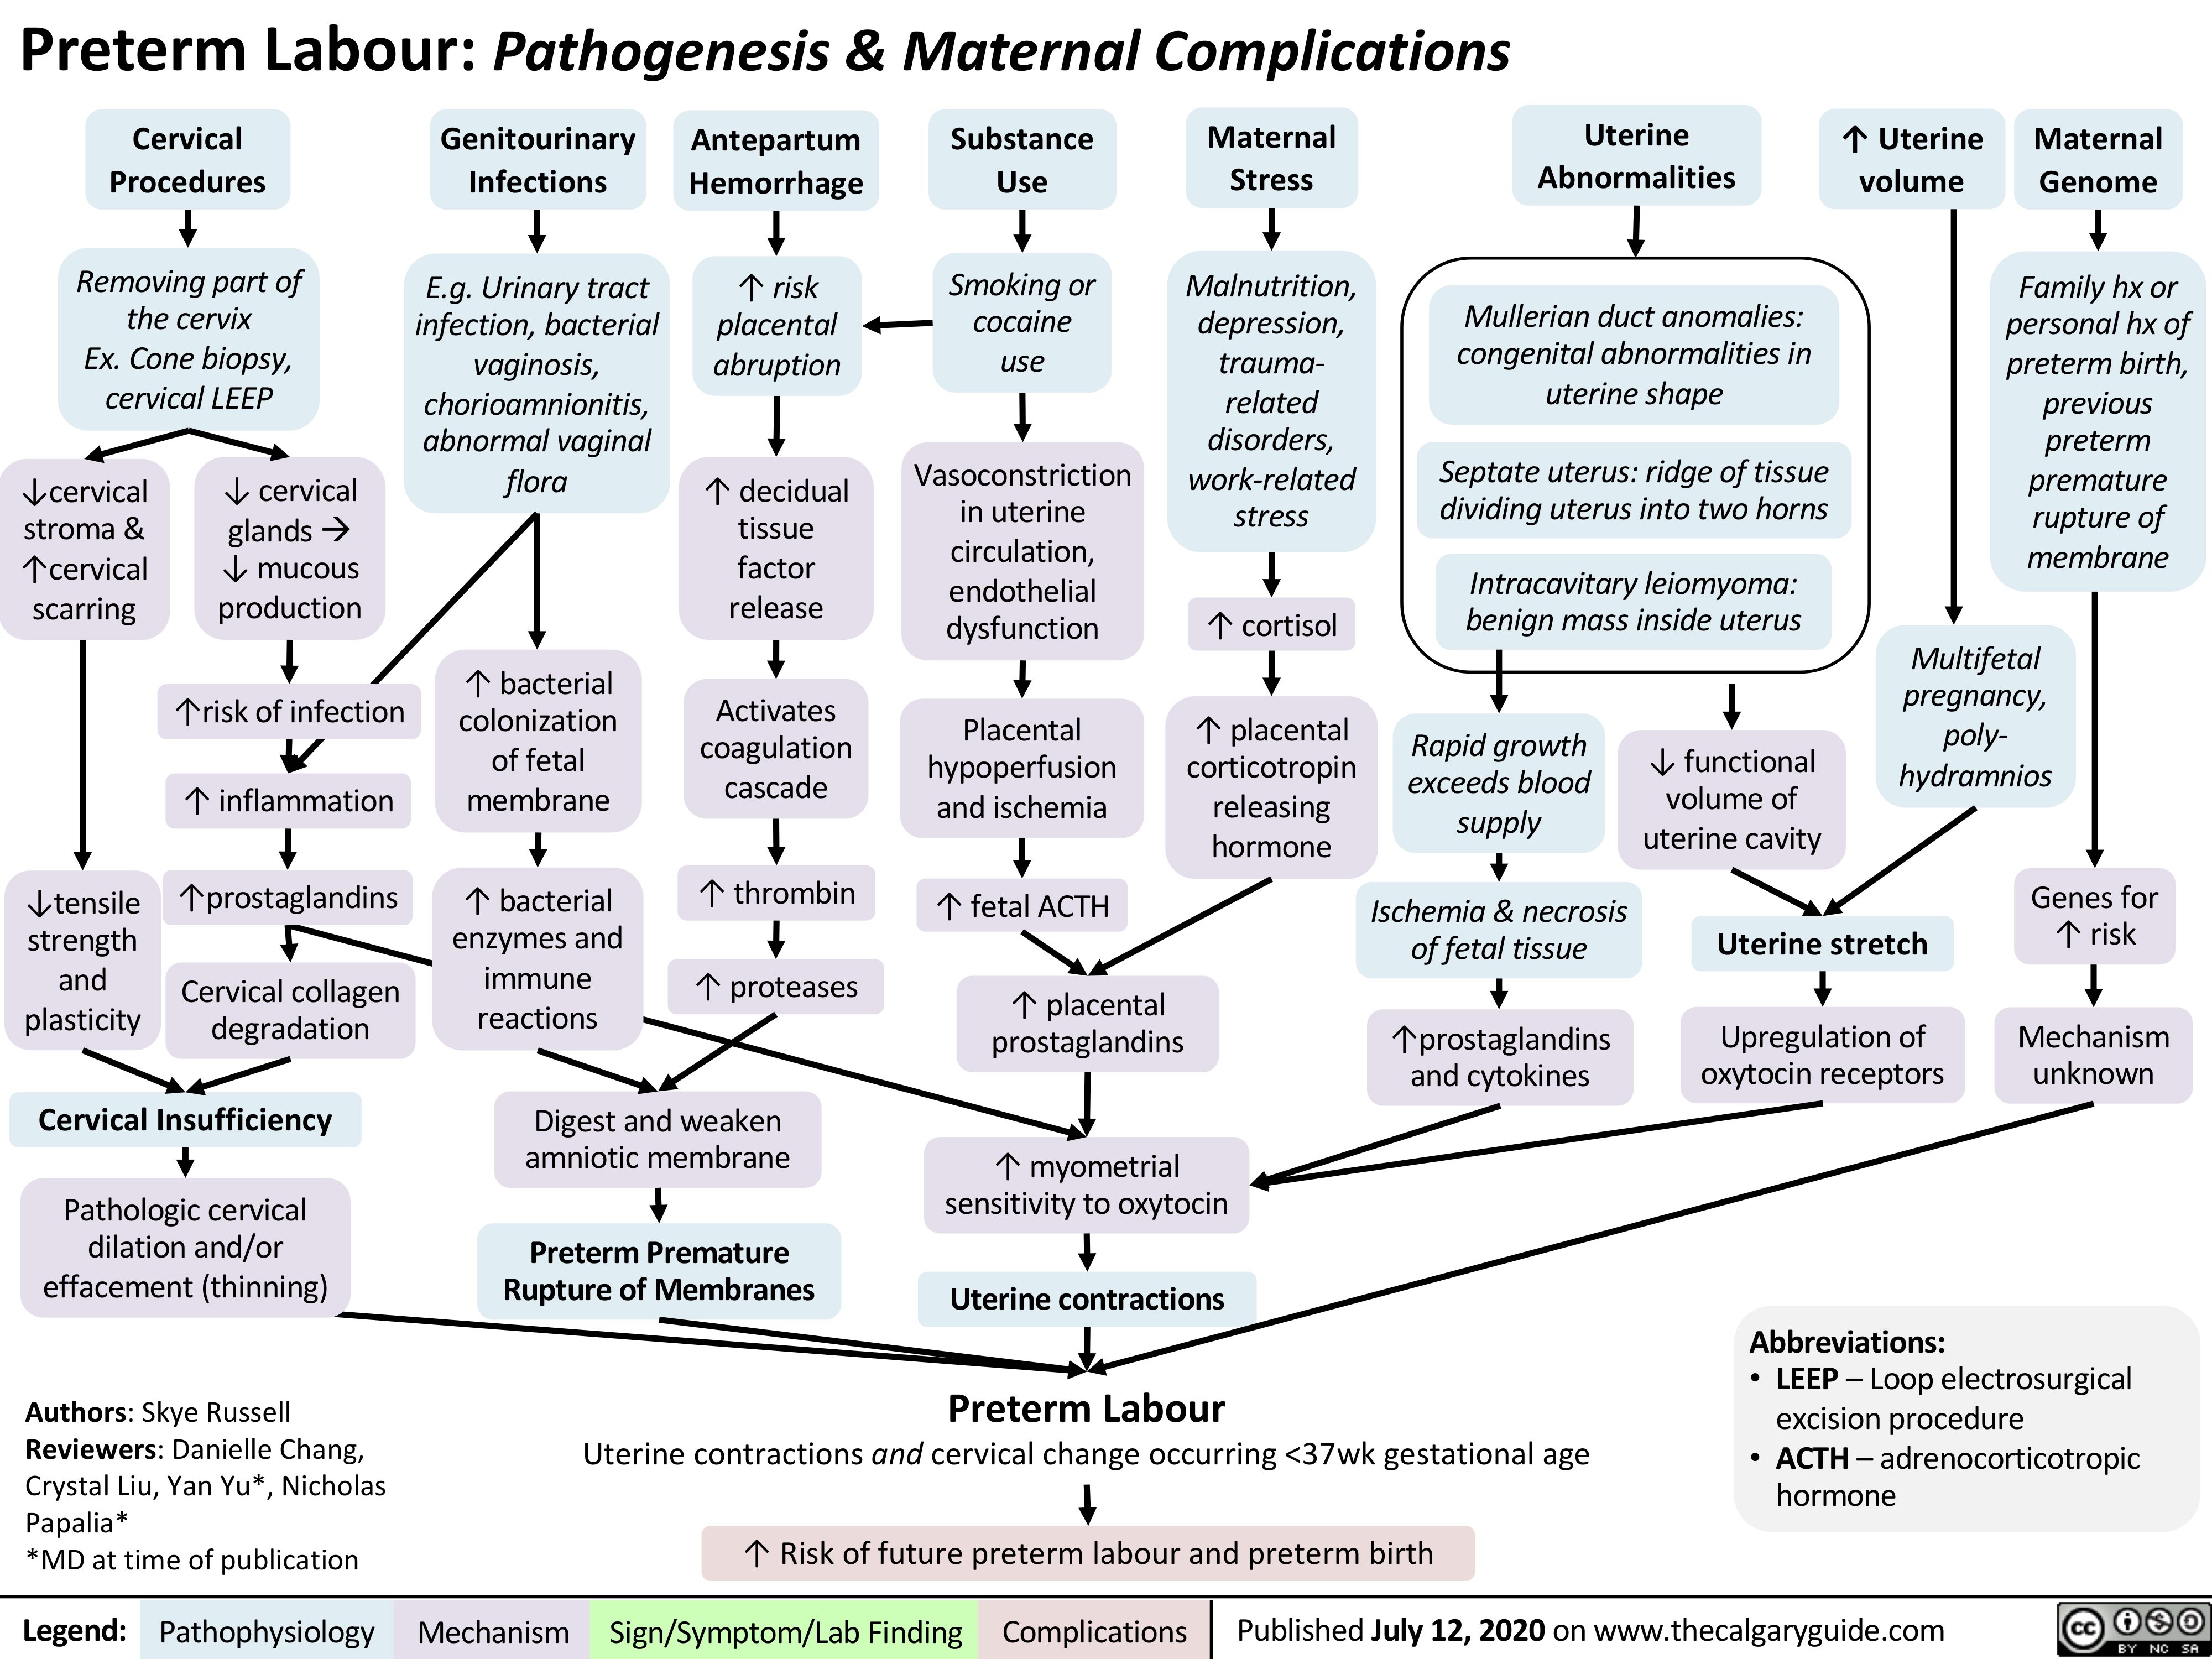 Preterm Labour: Pathogenesis & Maternal Complications
        Cervical Procedures
Removing part of the cervix
Ex. Cone biopsy, cervical LEEP
Genitourinary Infections
E.g. Urinary tract infection, bacterial vaginosis, chorioamnionitis, abnormal vaginal flora
↑ bacterial colonization of fetal membrane
↑ bacterial enzymes and immune reactions
Antepartum Hemorrhage
↑ risk placental abruption
↑ decidual tissue factor release
Activates coagulation cascade
↑ thrombin ↑ proteases
Substance Use
Smoking or cocaine use
Vasoconstriction in uterine circulation, endothelial dysfunction
Placental hypoperfusion and ischemia
↑ fetal ACTH
↑ placental prostaglandins
Maternal Stress
Malnutrition, depression, trauma- related disorders, work-related stress
↑ cortisol
↑ placental corticotropin releasing hormone
Uterine Abnormalities
Mullerian duct anomalies: congenital abnormalities in uterine shape
Septate uterus: ridge of tissue dividing uterus into two horns
Intracavitary leiomyoma: benign mass inside uterus
↑ Uterine volume
Maternal Genome
Family hx or personal hx of preterm birth, previous preterm premature rupture of membrane
                        ↓cervical stroma & ↑cervical scarring
↓ cervical glandsà ↓ mucous production
↑risk of infection ↑ inflammation
↑prostaglandins
Cervical collagen degradation
                   Rapid growth exceeds blood supply
Ischemia & necrosis of fetal tissue
↑prostaglandins and cytokines
↓ functional volume of uterine cavity
Multifetal pregnancy, poly- hydramnios
               ↓tensile strength and plasticity
Uterine stretch
Upregulation of oxytocin receptors
Genes for ↑ risk
Mechanism unknown
                      Cervical Insufficiency
Pathologic cervical dilation and/or effacement (thinning)
Authors: Skye Russell Reviewers: Danielle Chang, Crystal Liu, Yan Yu*, Nicholas Papalia*
*MD at time of publication
Digest and weaken amniotic membrane
Preterm Premature Rupture of Membranes
↑ myometrial sensitivity to oxytocin
Uterine contractions Preterm Labour
           Uterine contractions and cervical change occurring <37wk gestational age ↑ Risk of future preterm labour and preterm birth
Abbreviations:
• LEEP – Loop electrosurgical
excision procedure
• ACTH – adrenocorticotropic
hormone
   Legend:
 Pathophysiology
Mechanism
Sign/Symptom/Lab Finding
  Complications
 Published July 12, 2020 on www.thecalgaryguide.com
   